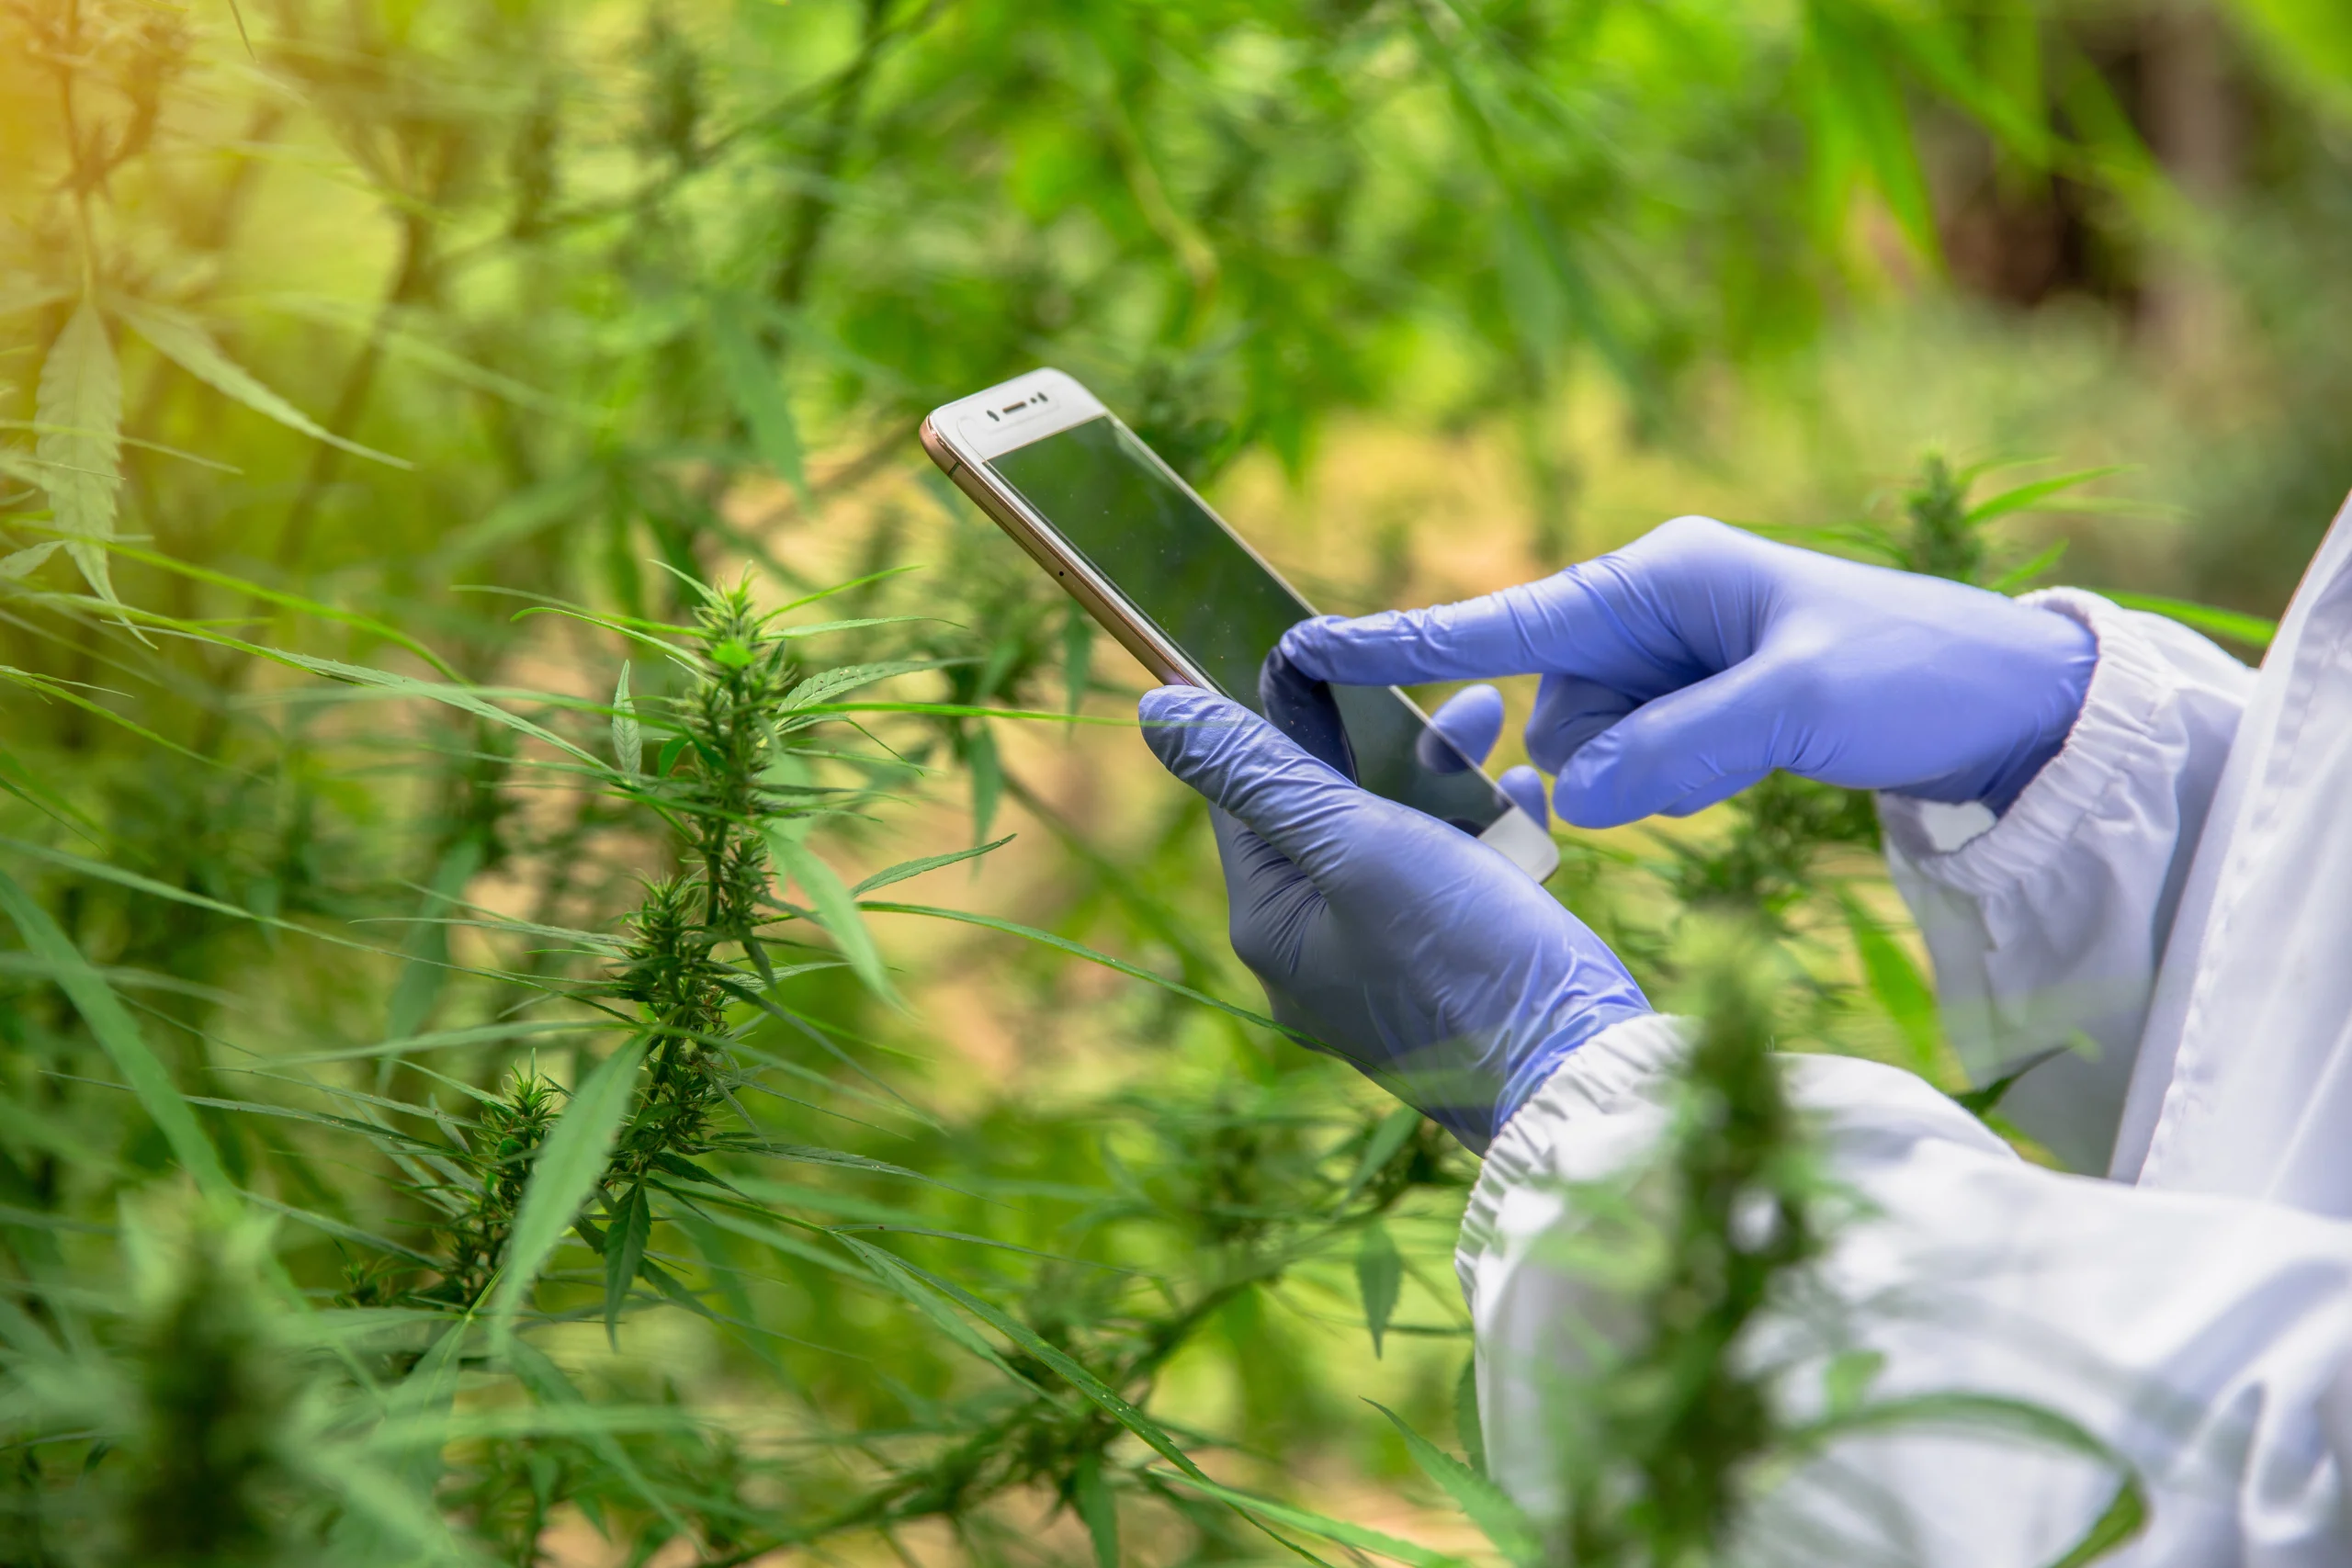 Person on IPhone using some sort of technology while looking at marijuana plant